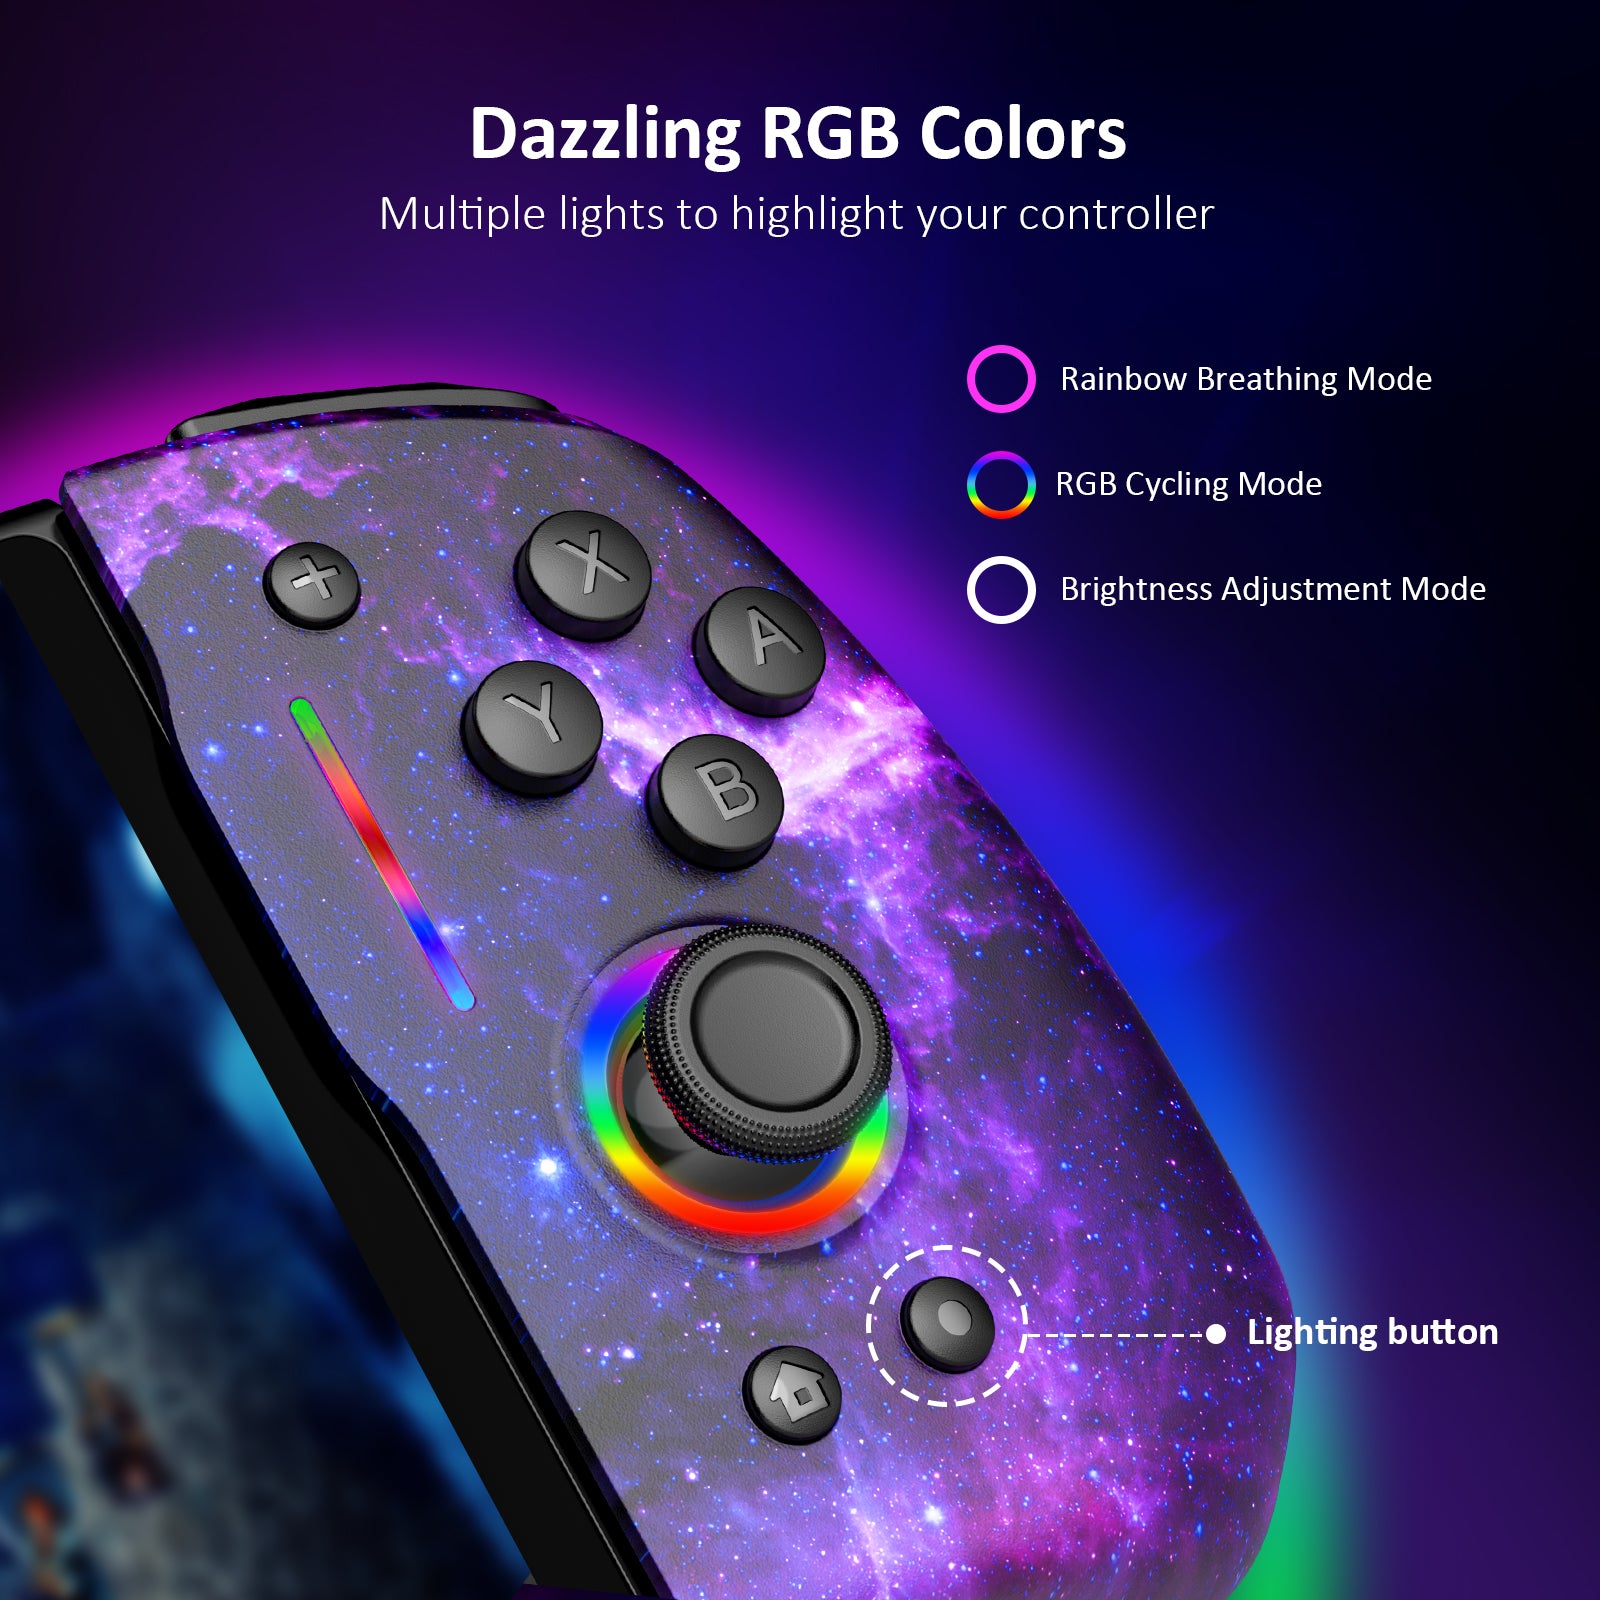 Gripcon controller with customizable RGB lighting: Breathing, Cycling, Brightness.